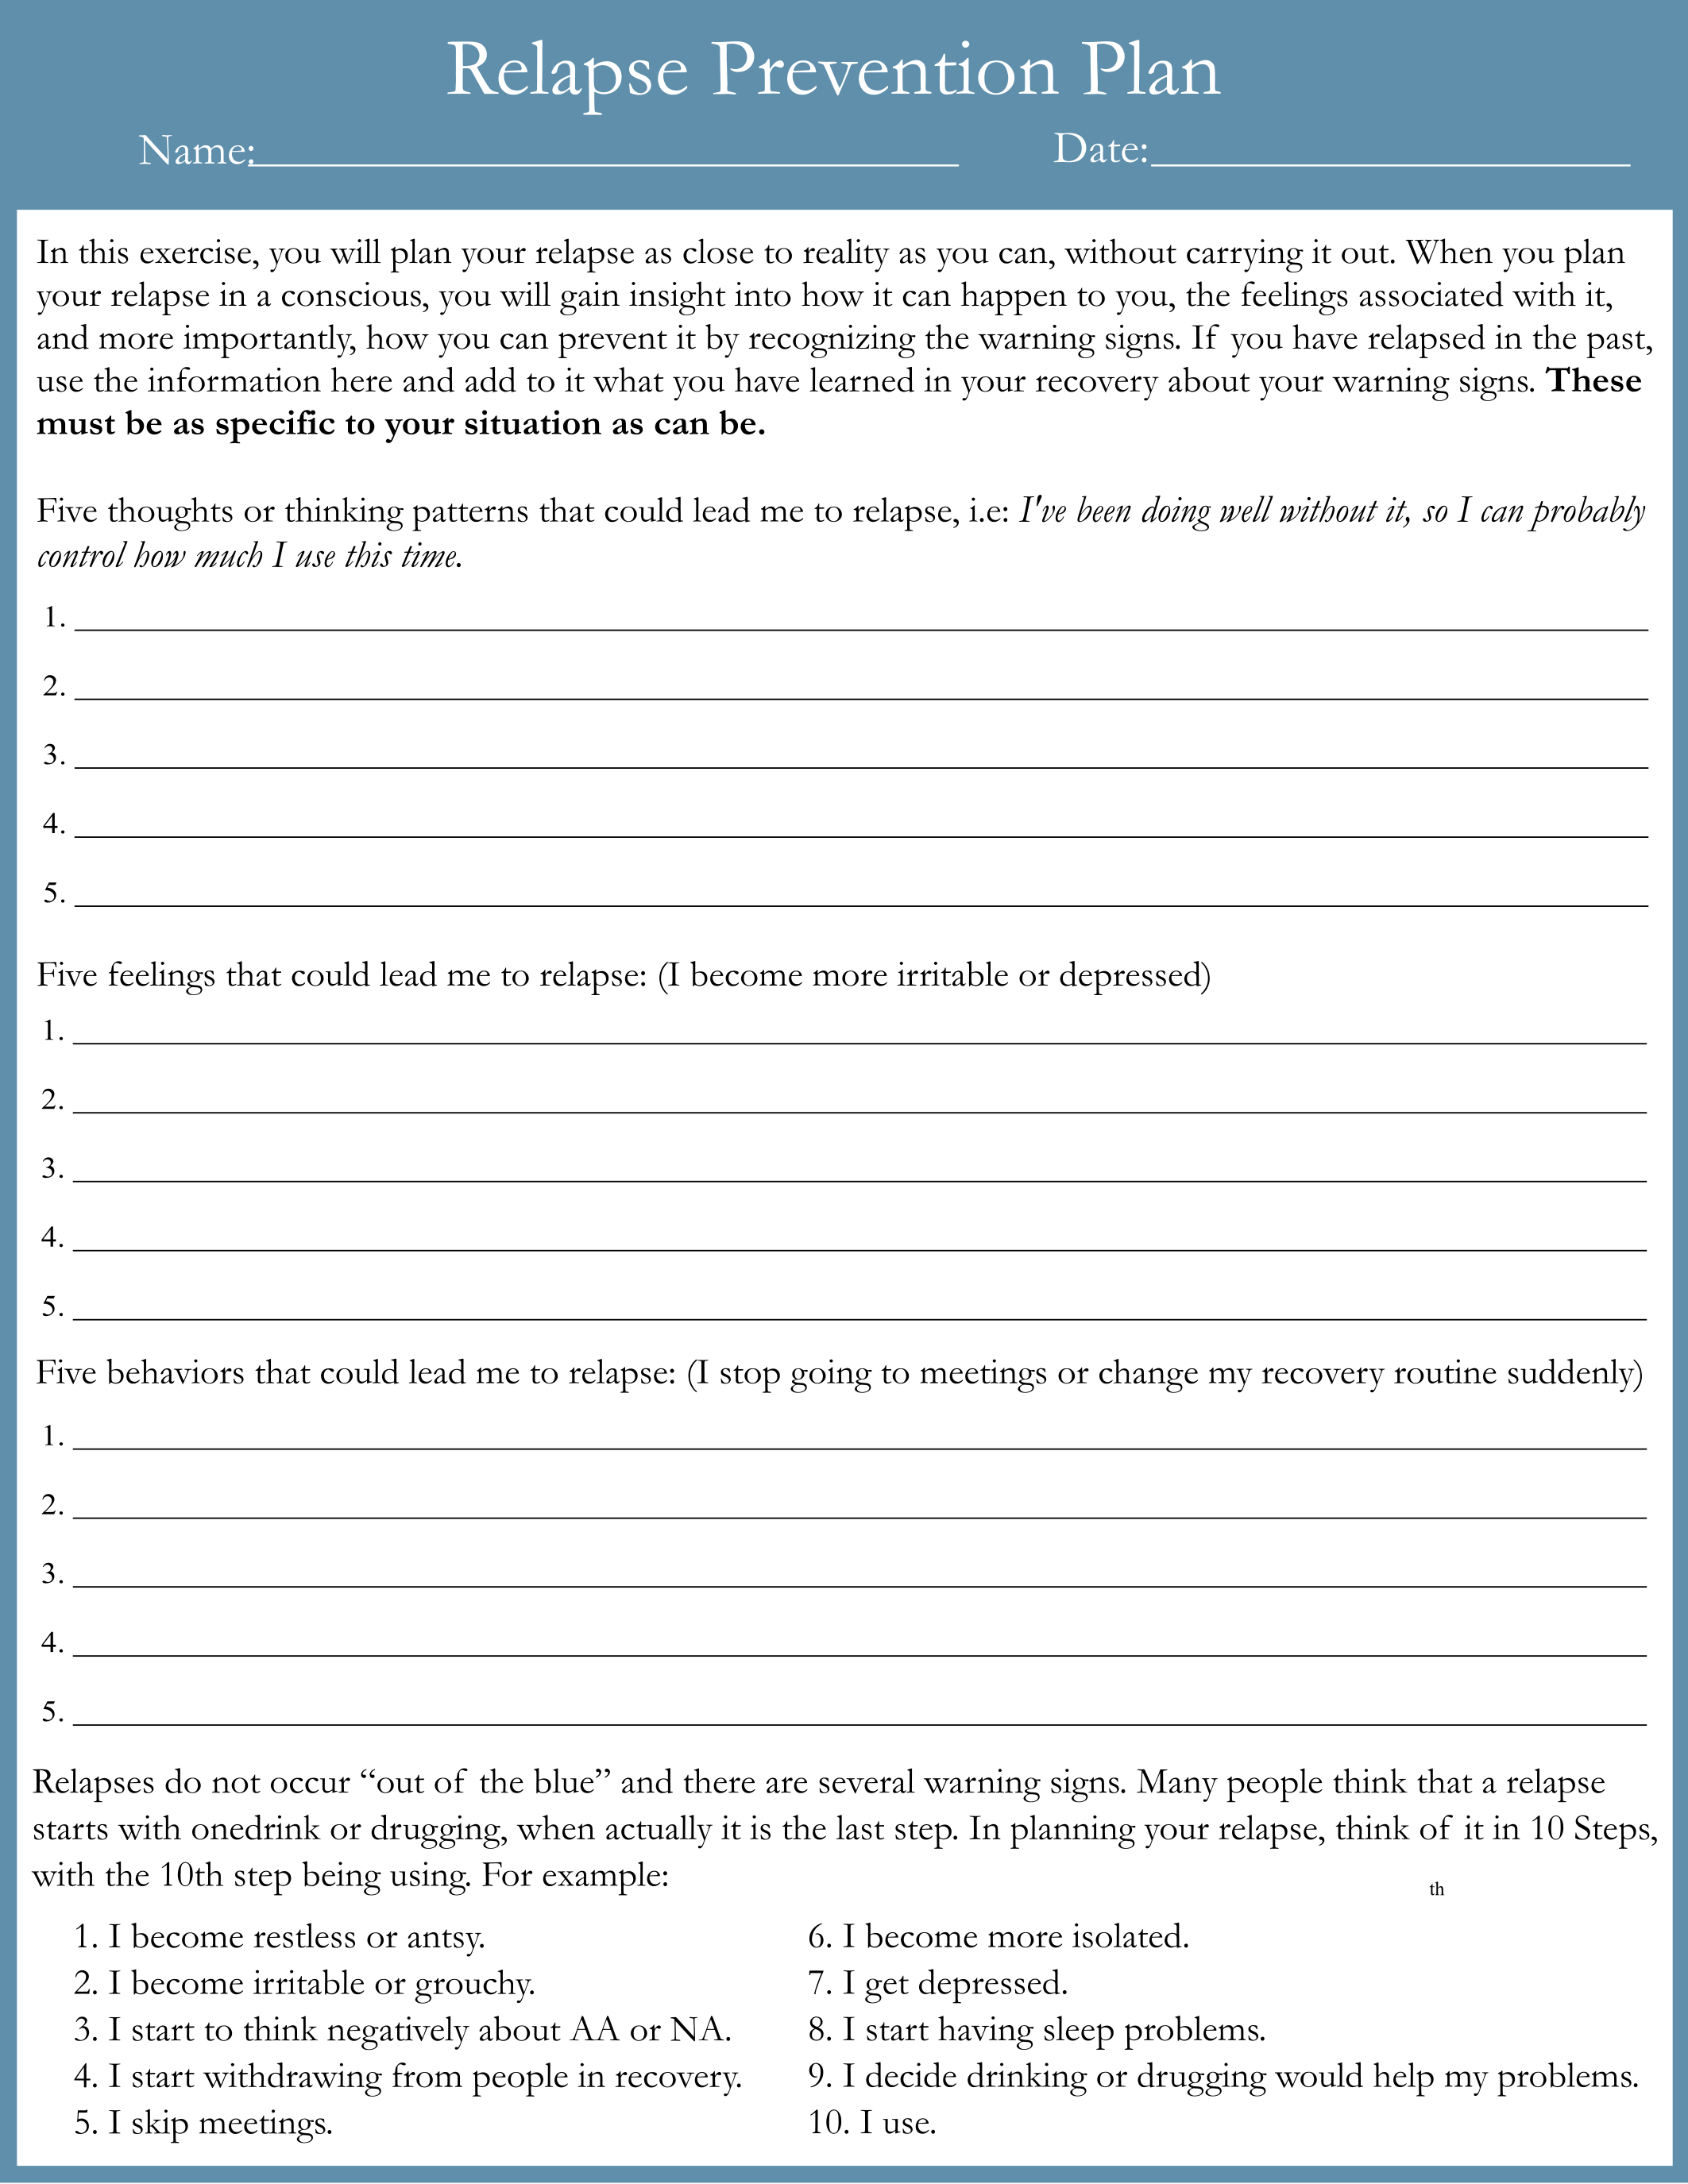 Printable Relapse Prevention Worksheets Plan and Template - Printerfriendly